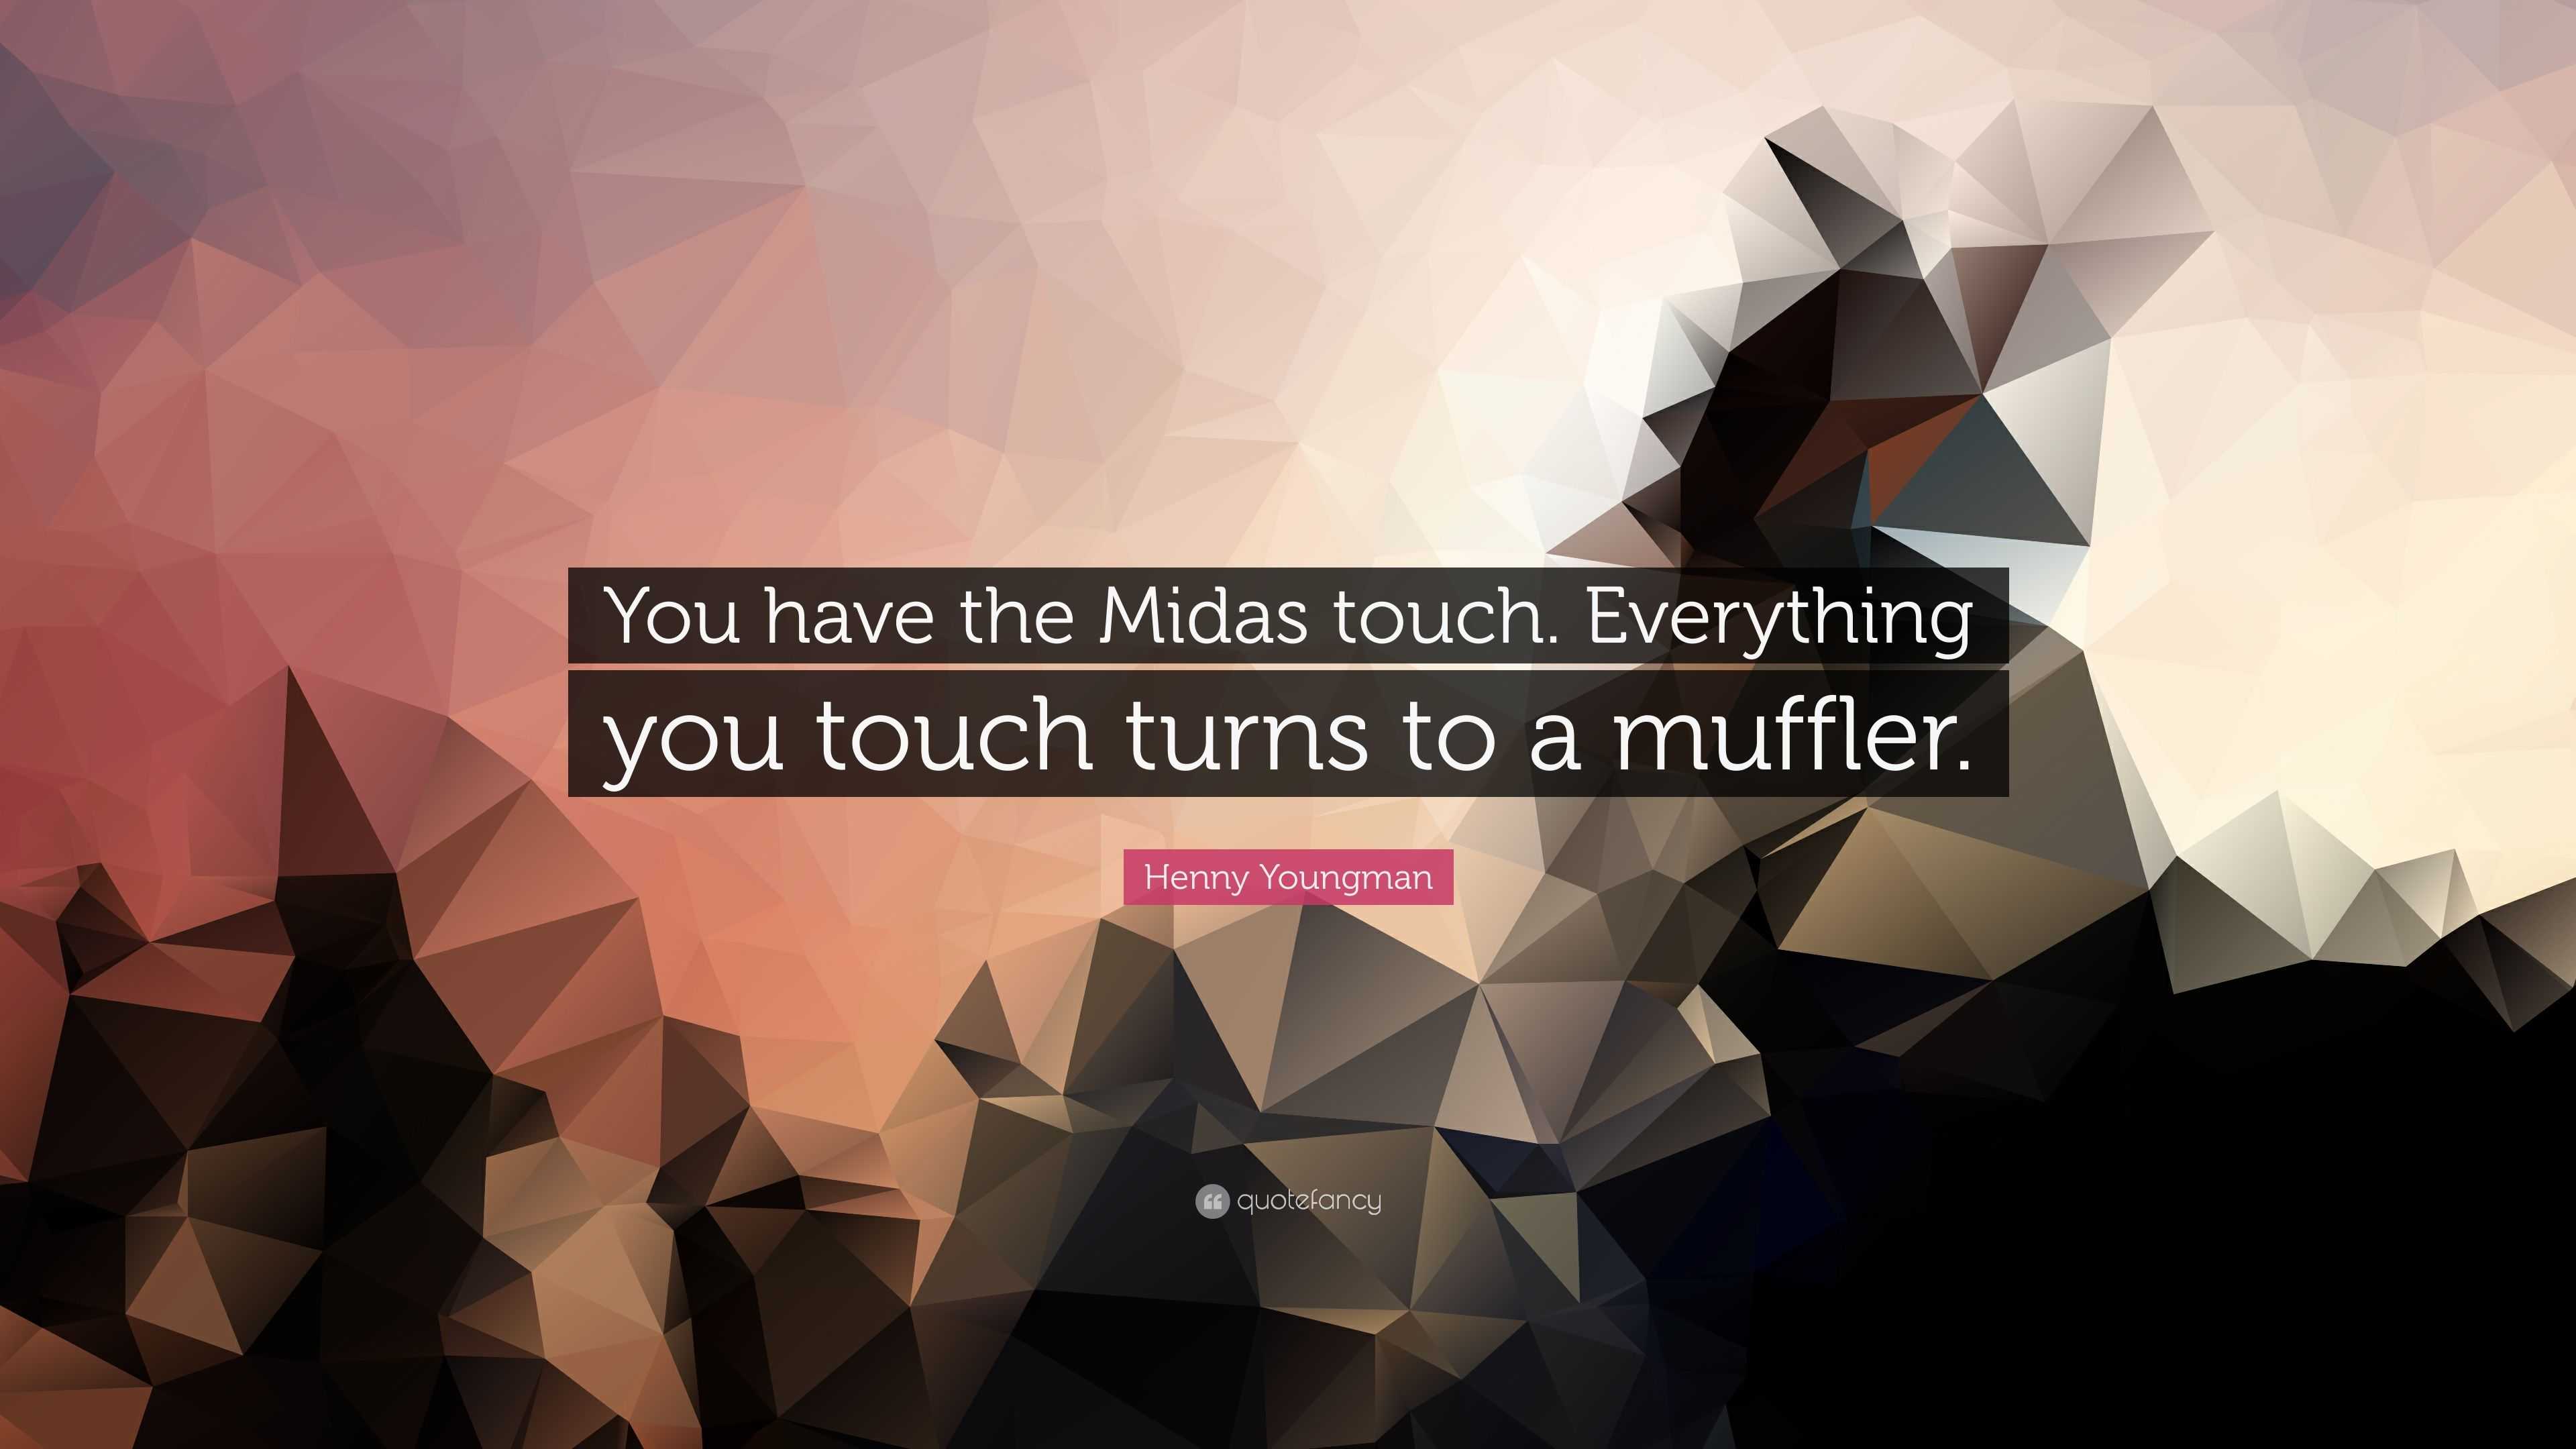 Henny Youngman Quote: “You have the Midas touch. Everything you